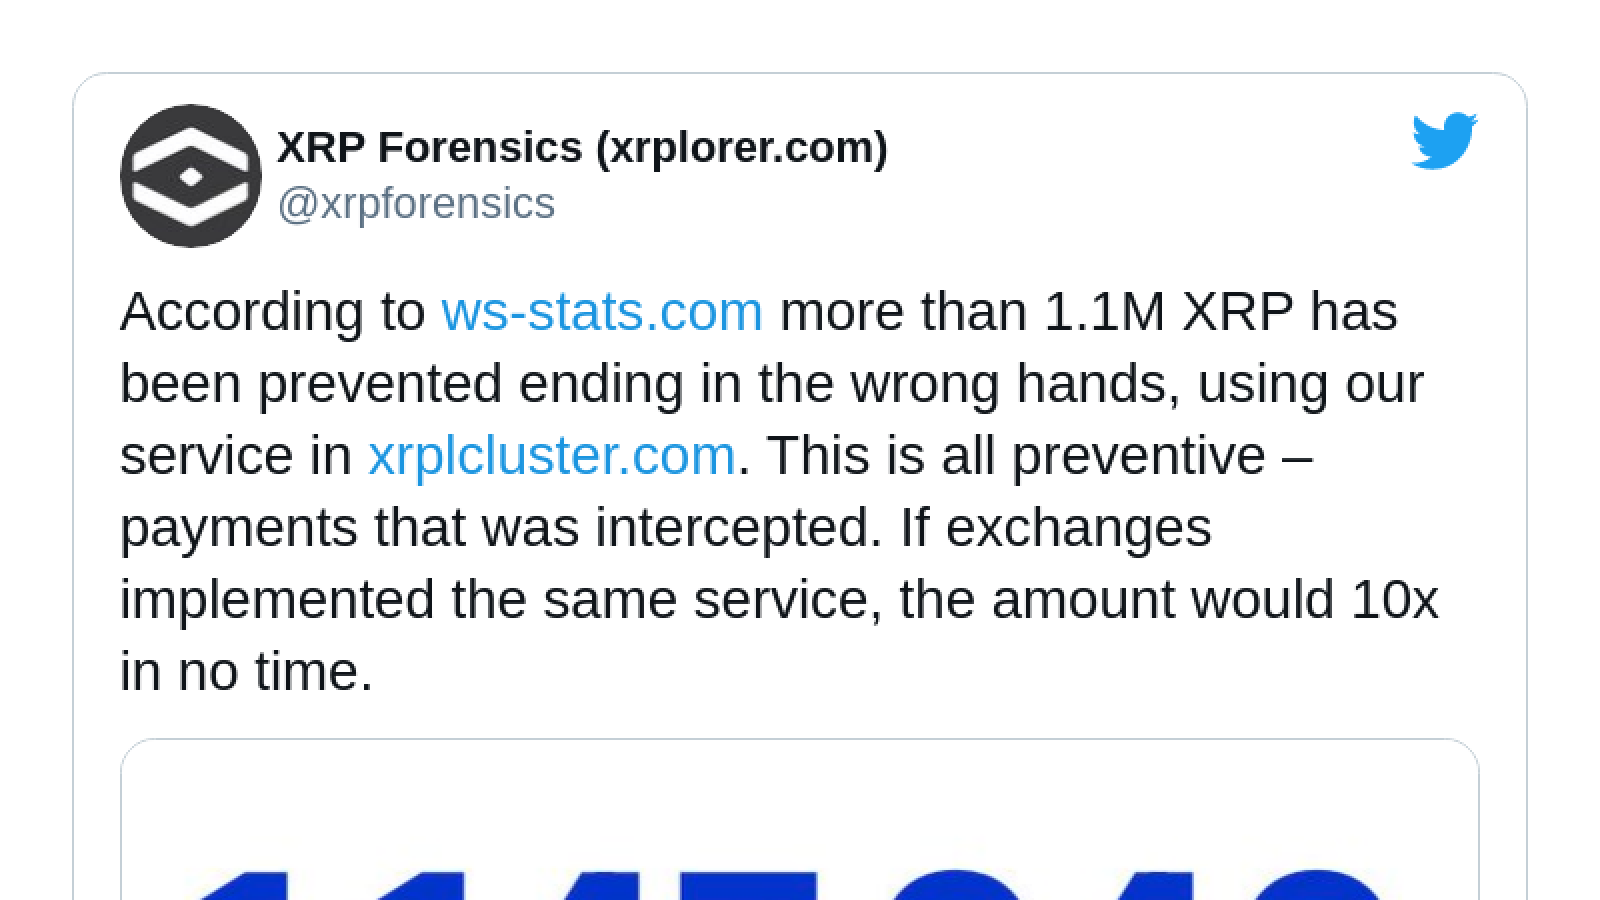 XRP Forensics team shared statistics on scams